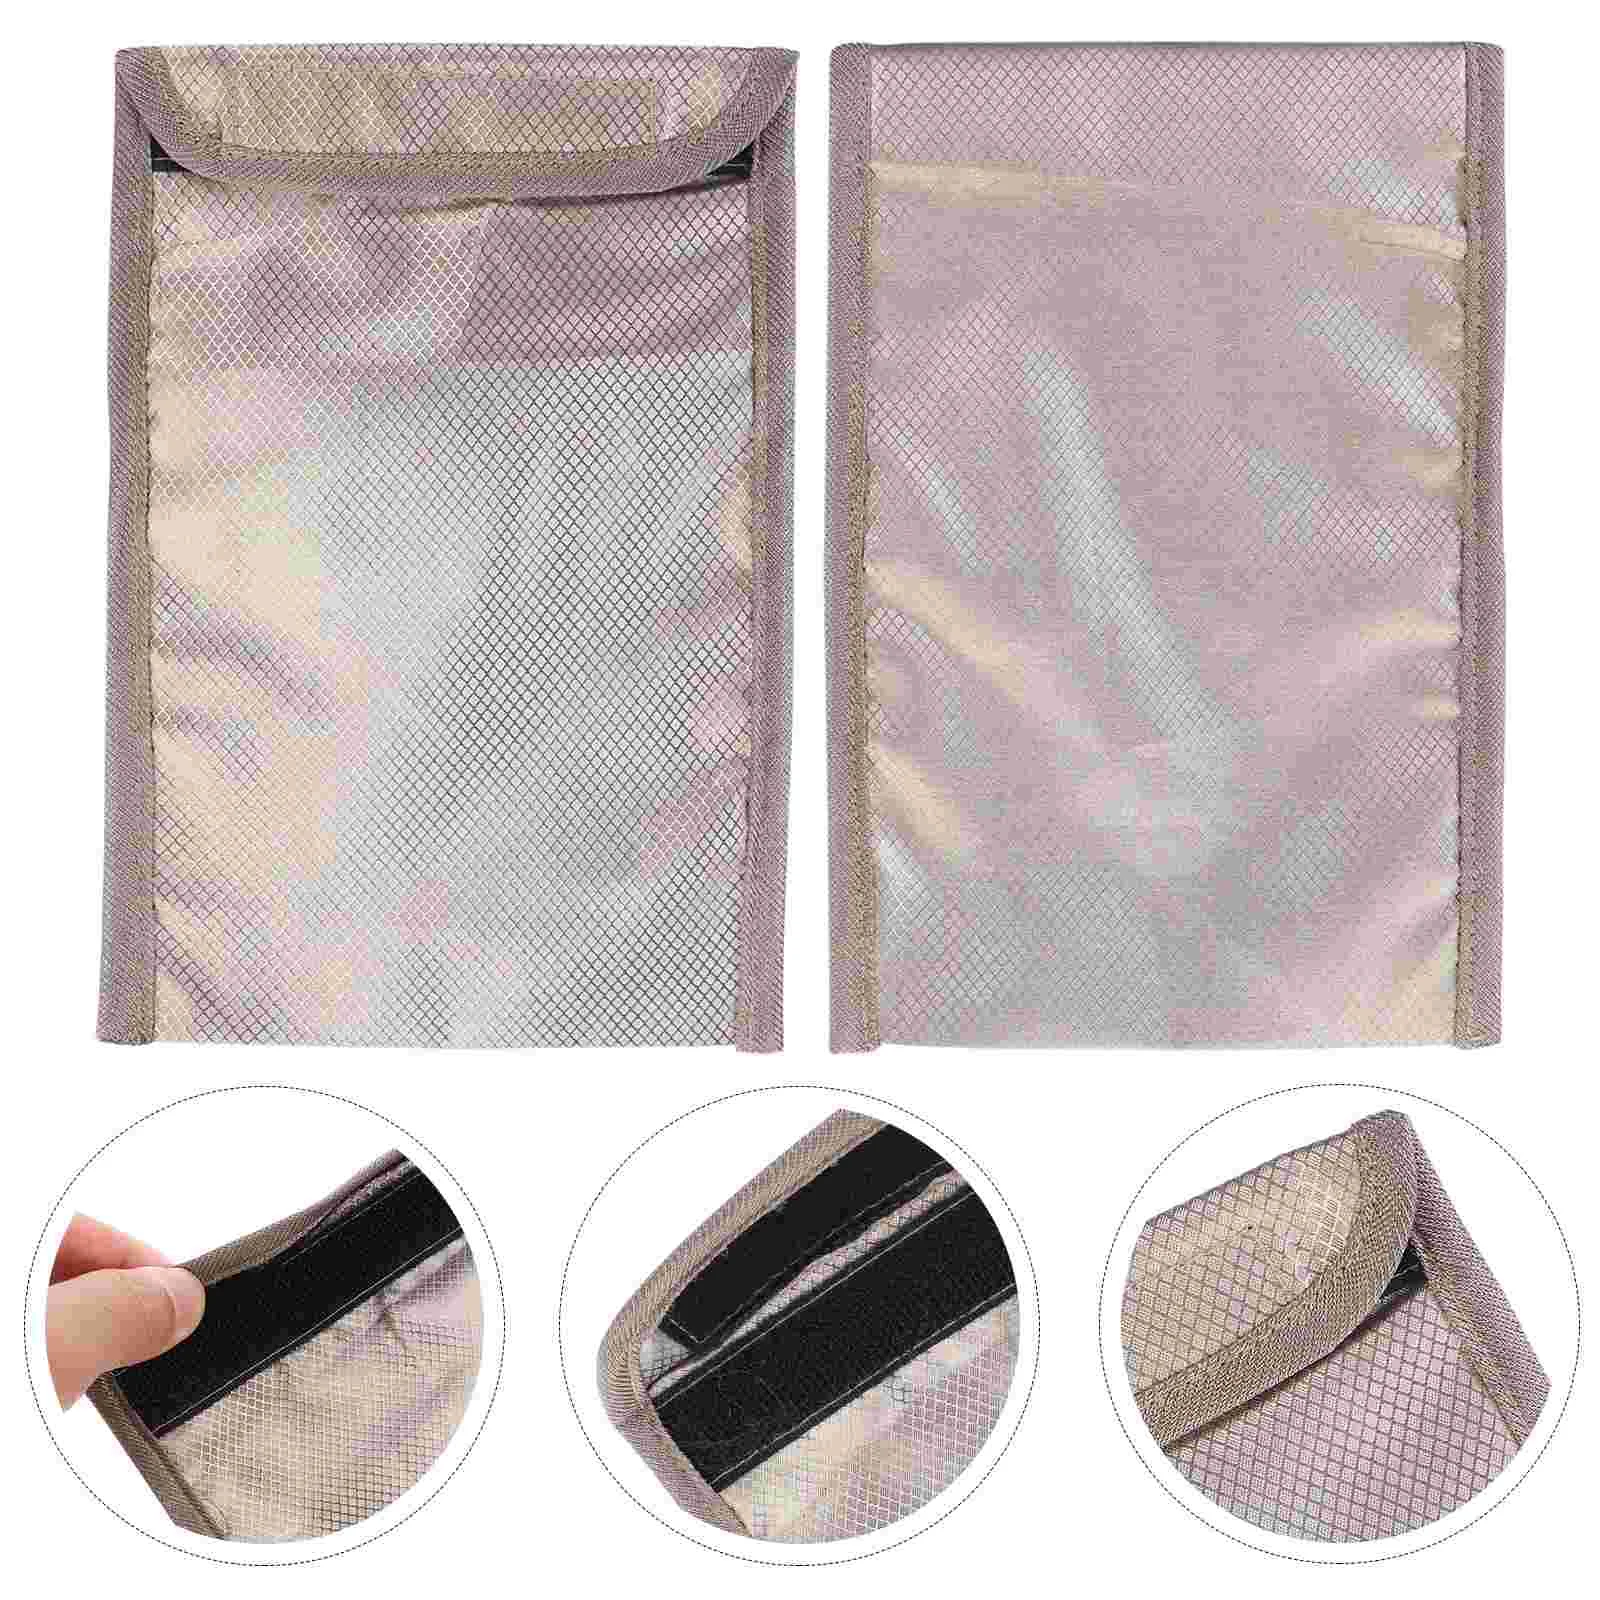 

Anti Case Blocker Radiation Faraday Emf Shielding Blocking Cell Pouch Signal Cellphone Sleeve Pregnant Mobile Spying Cage Rf